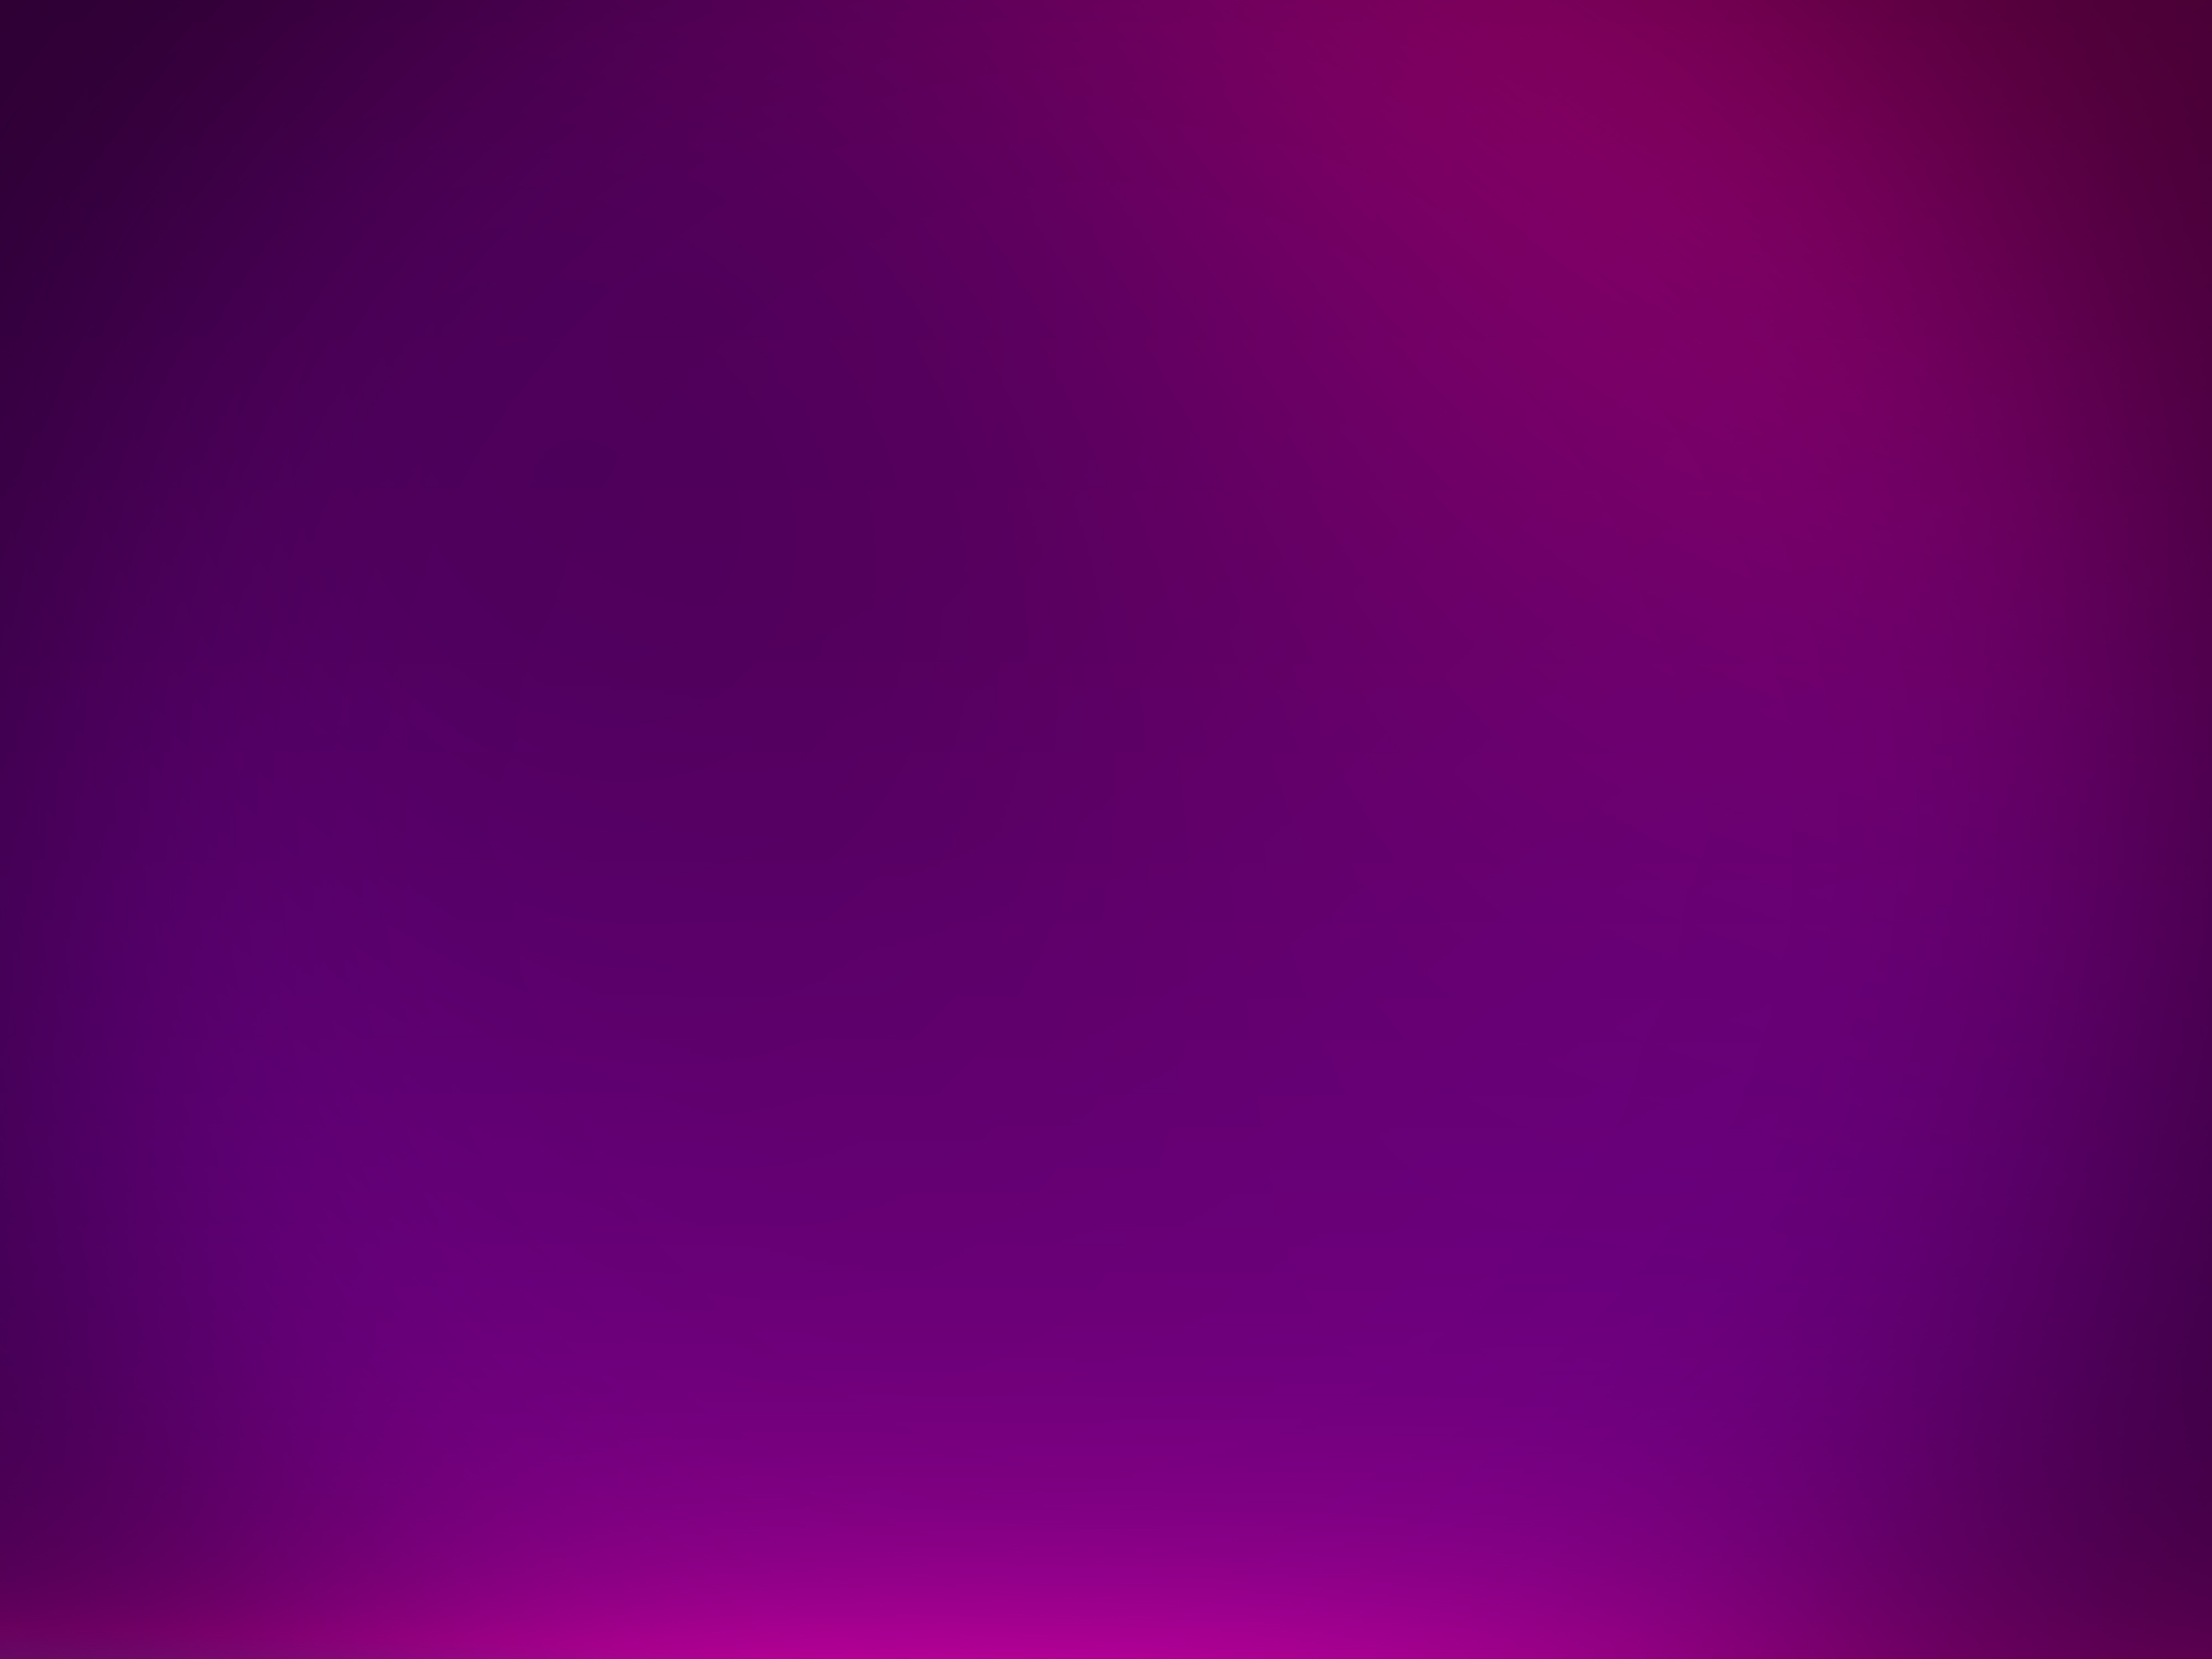 Purple Blur Hd Abstract 4k Wallpapers Images Backgrounds Photos Images